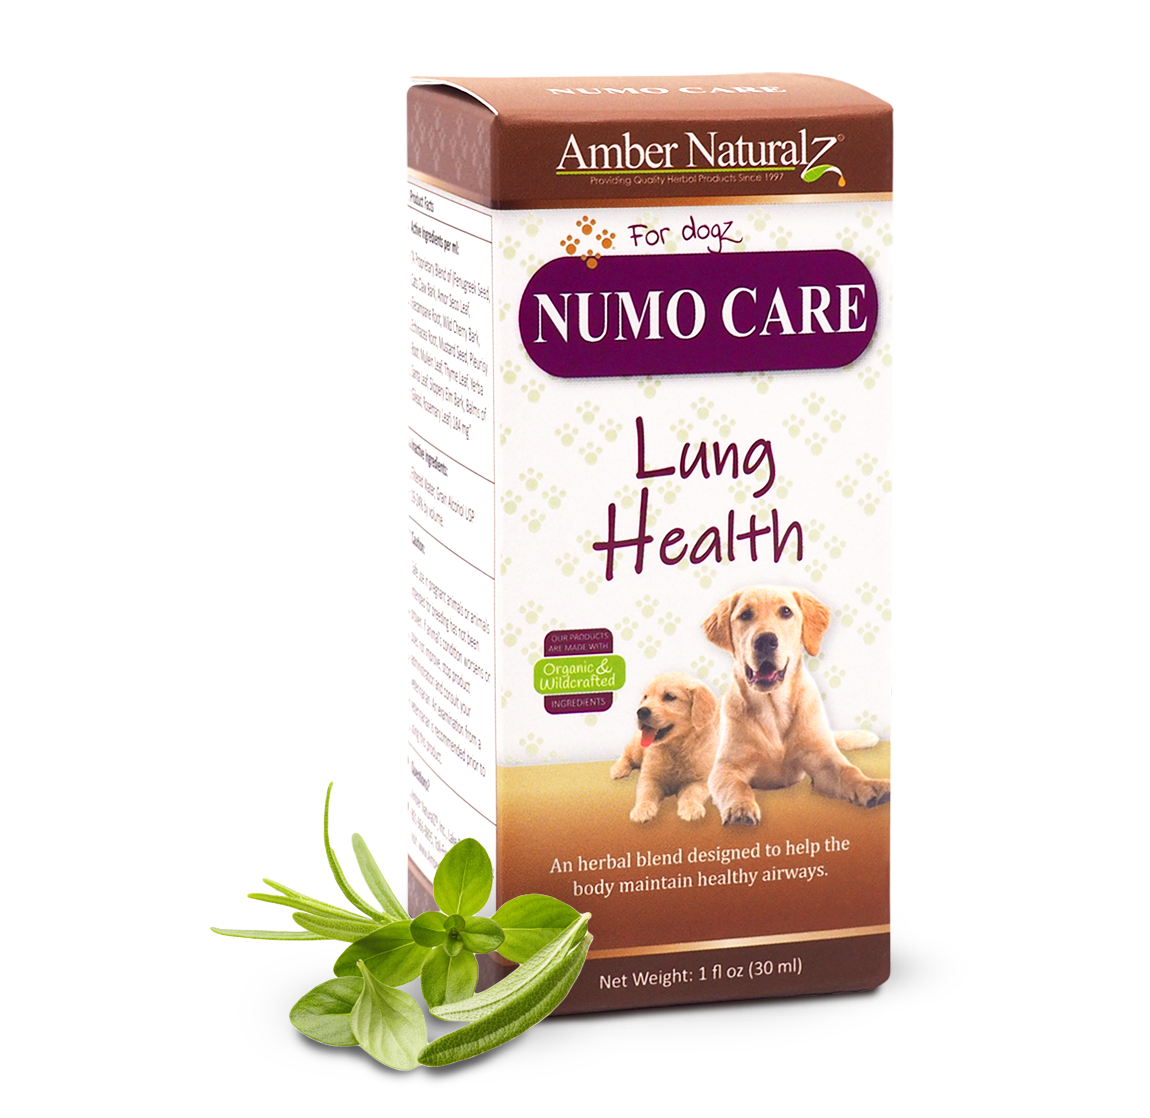 Amber Naturalz Numo Care Lung Health